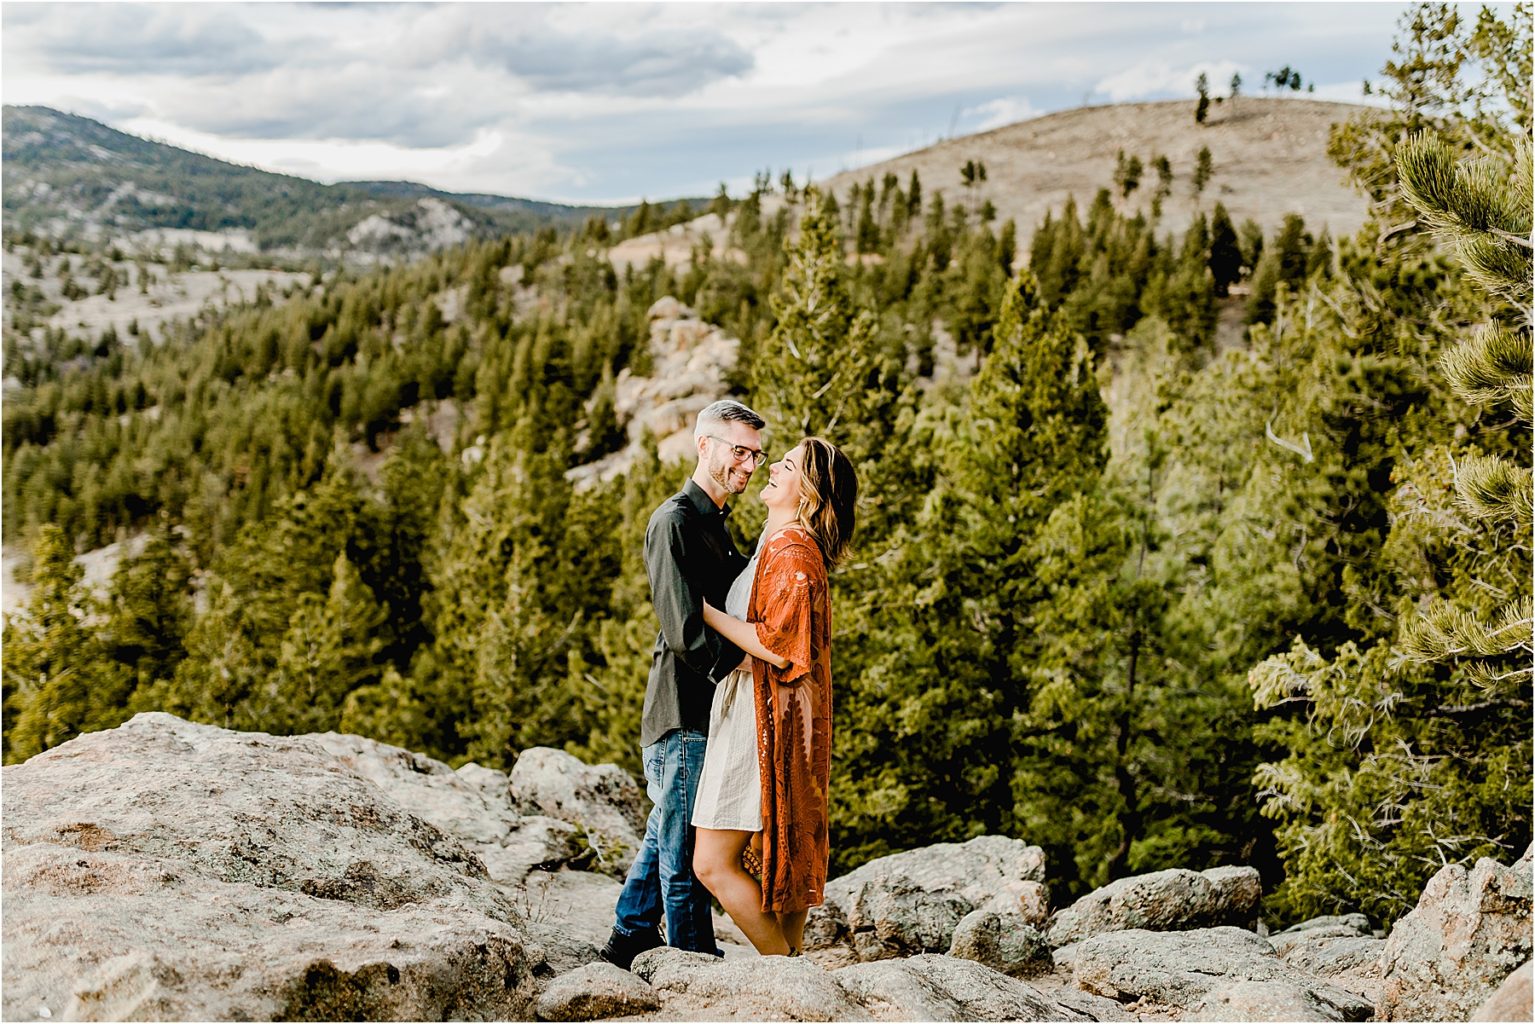 Marissa and Casey's adventure couples session in boulder colorado at gross reservoir. We took in amazing mountain and lake views, and watched a beautiful sunset up high on the rocks.